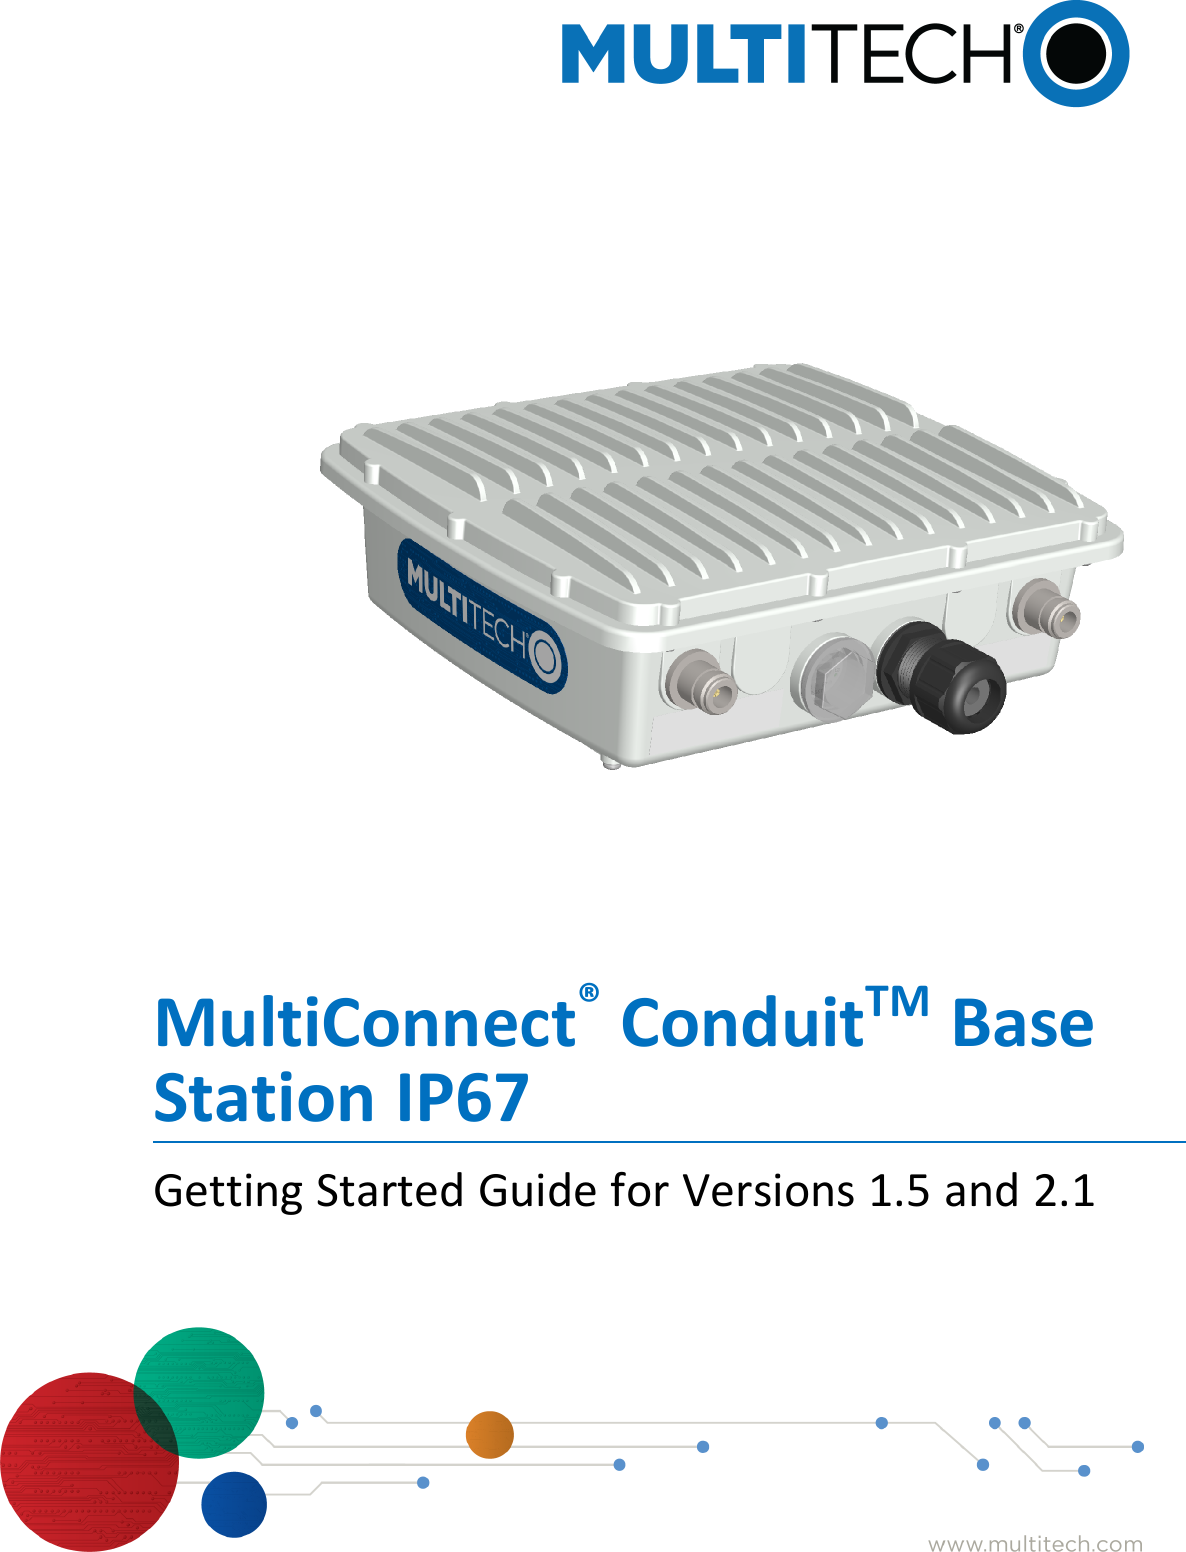 MultiConnect®ConduitTM BaseStation IP67Getting Started Guide for Versions 1.5 and 2.1